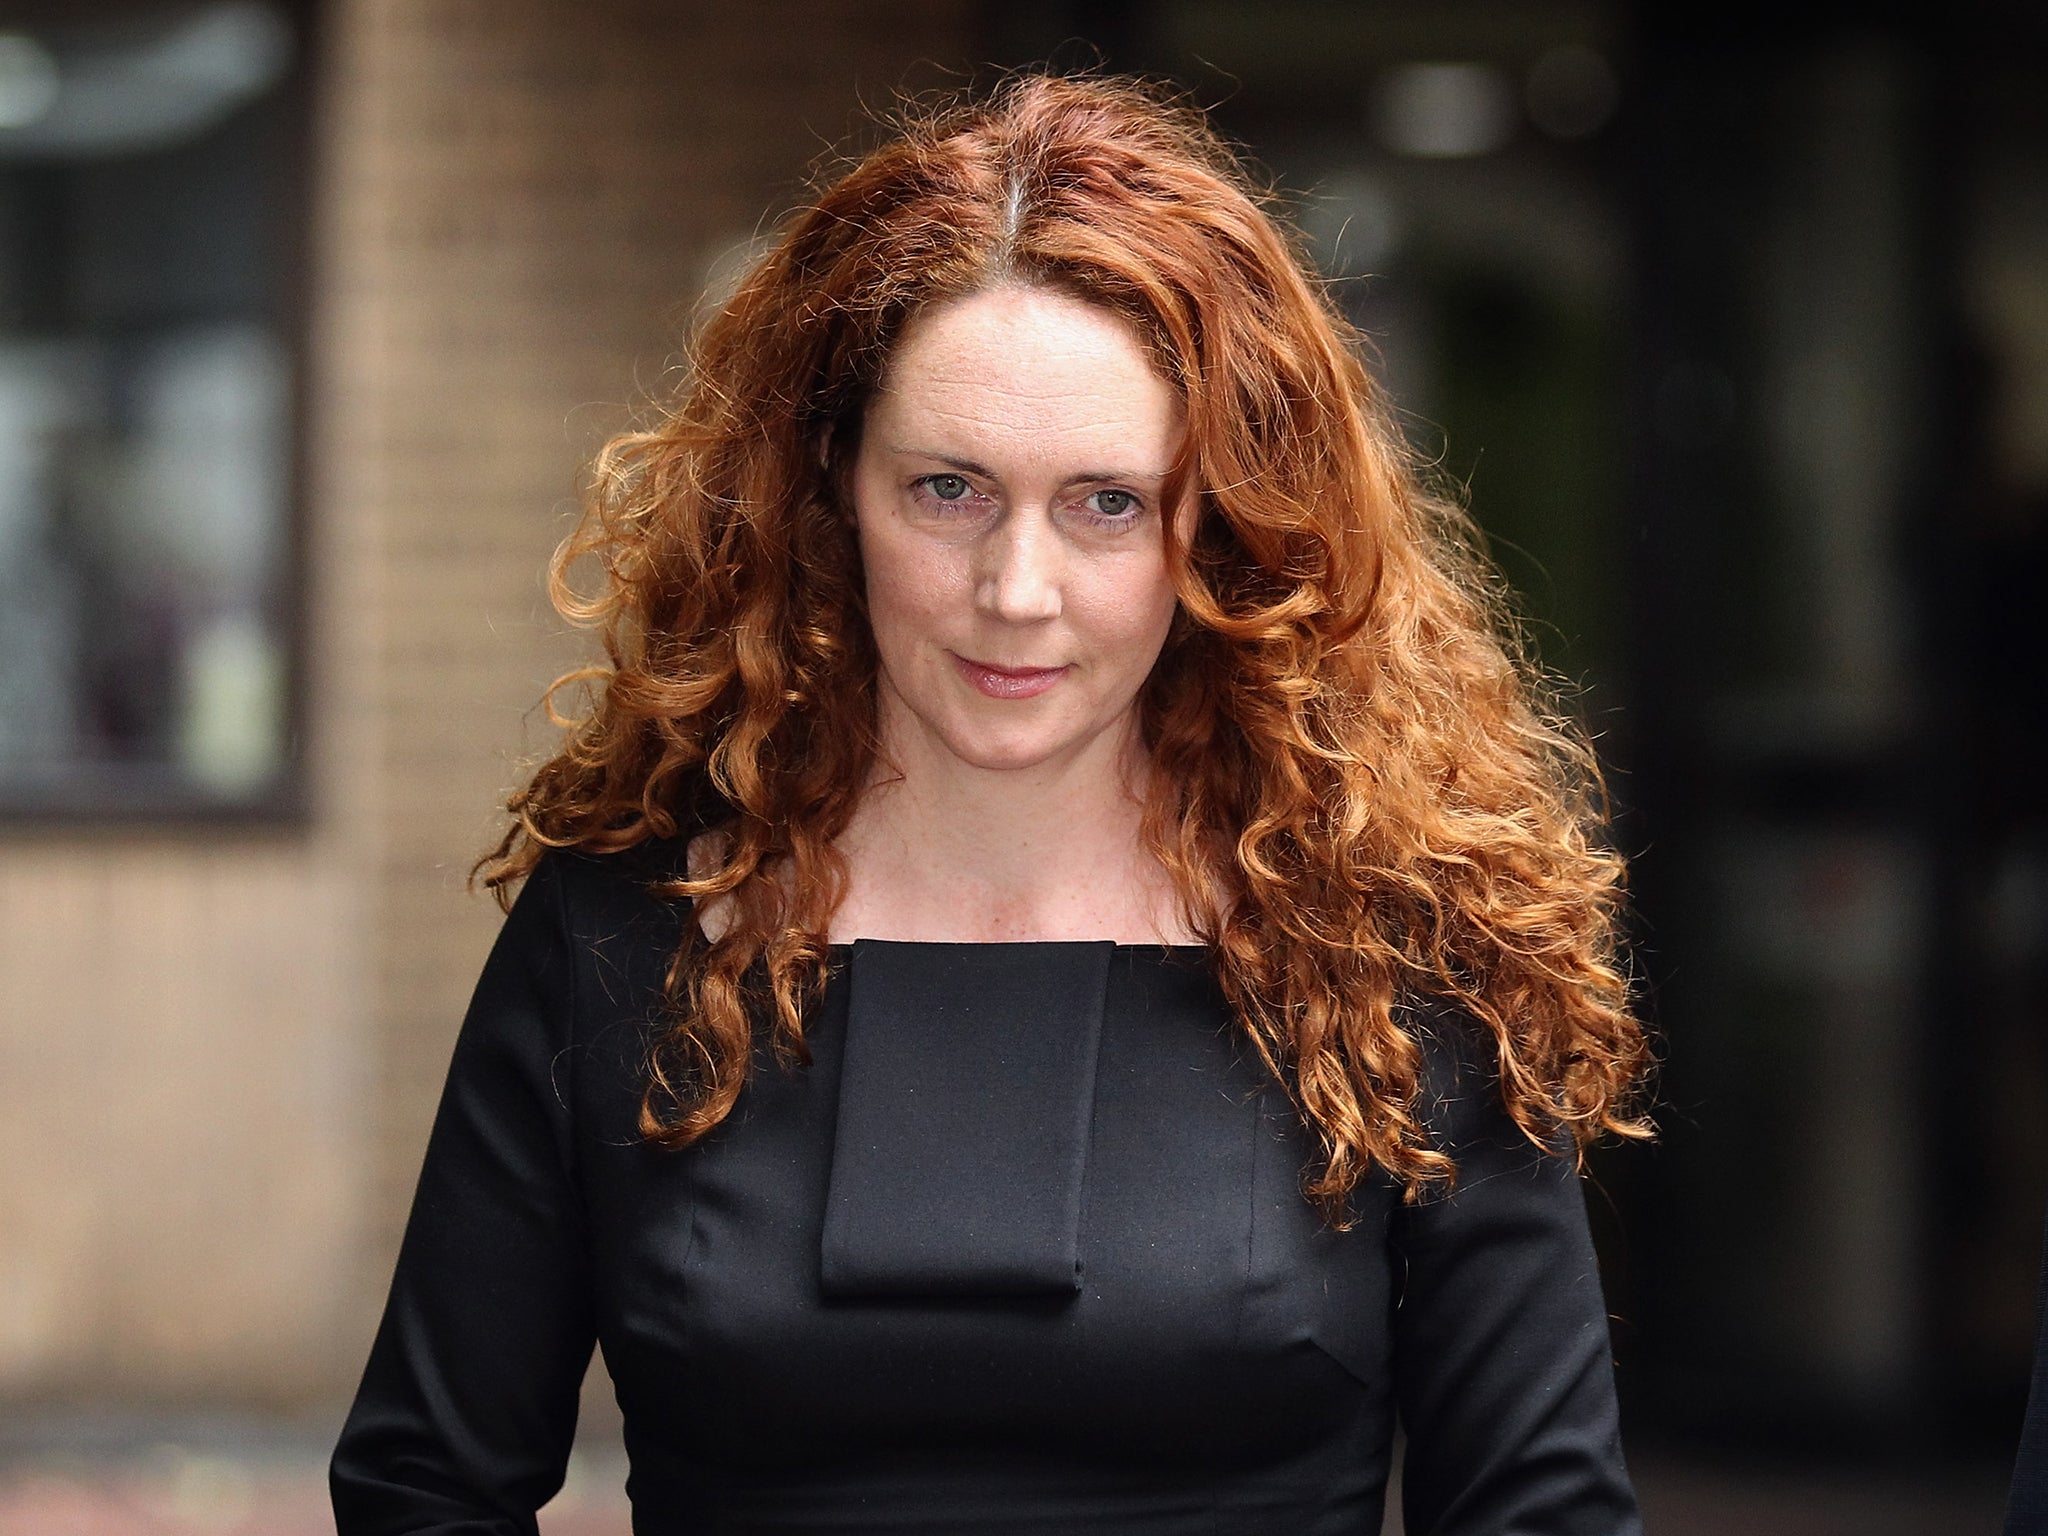 Rebekah Brooks was spotted at the London Bridge offices of News UK